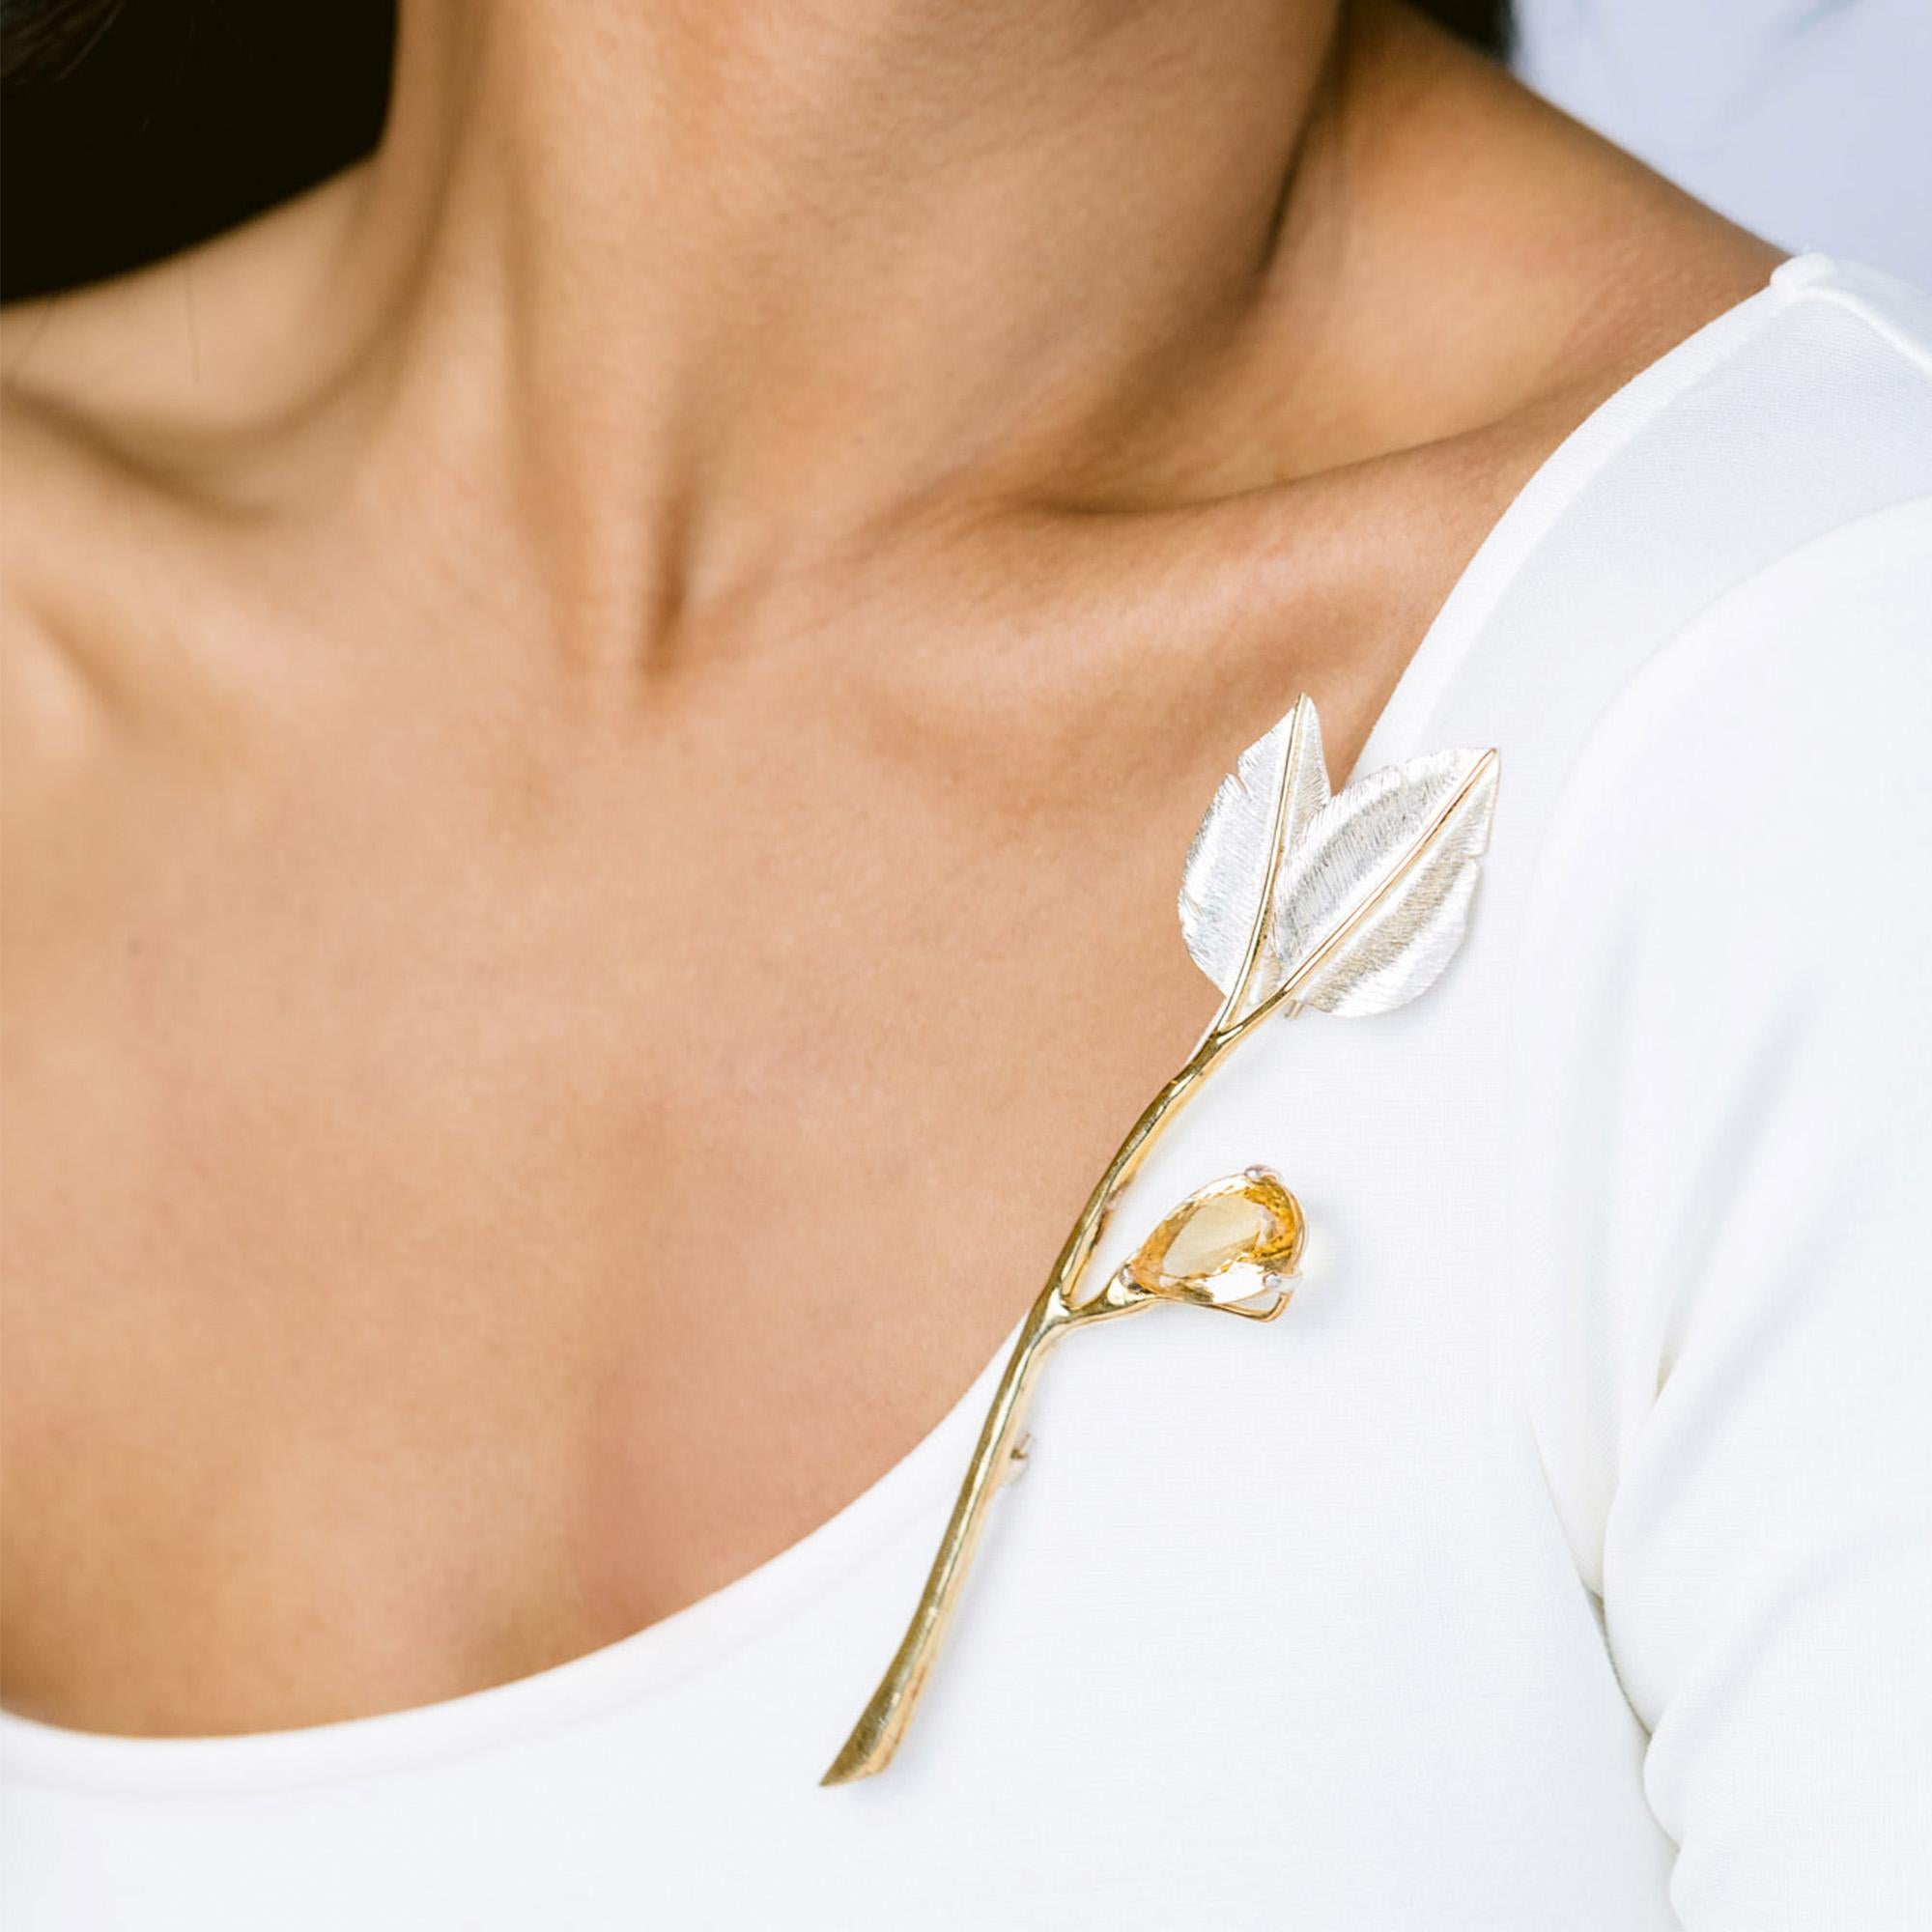 Intention: Appreciate the Little Things

Design: With attention paid to even the smallest details, the beautifully textured leaves and vermeil stem with citrine accent make a simple, fluid shape, stunning.

Style Suggestion: Wear high on the